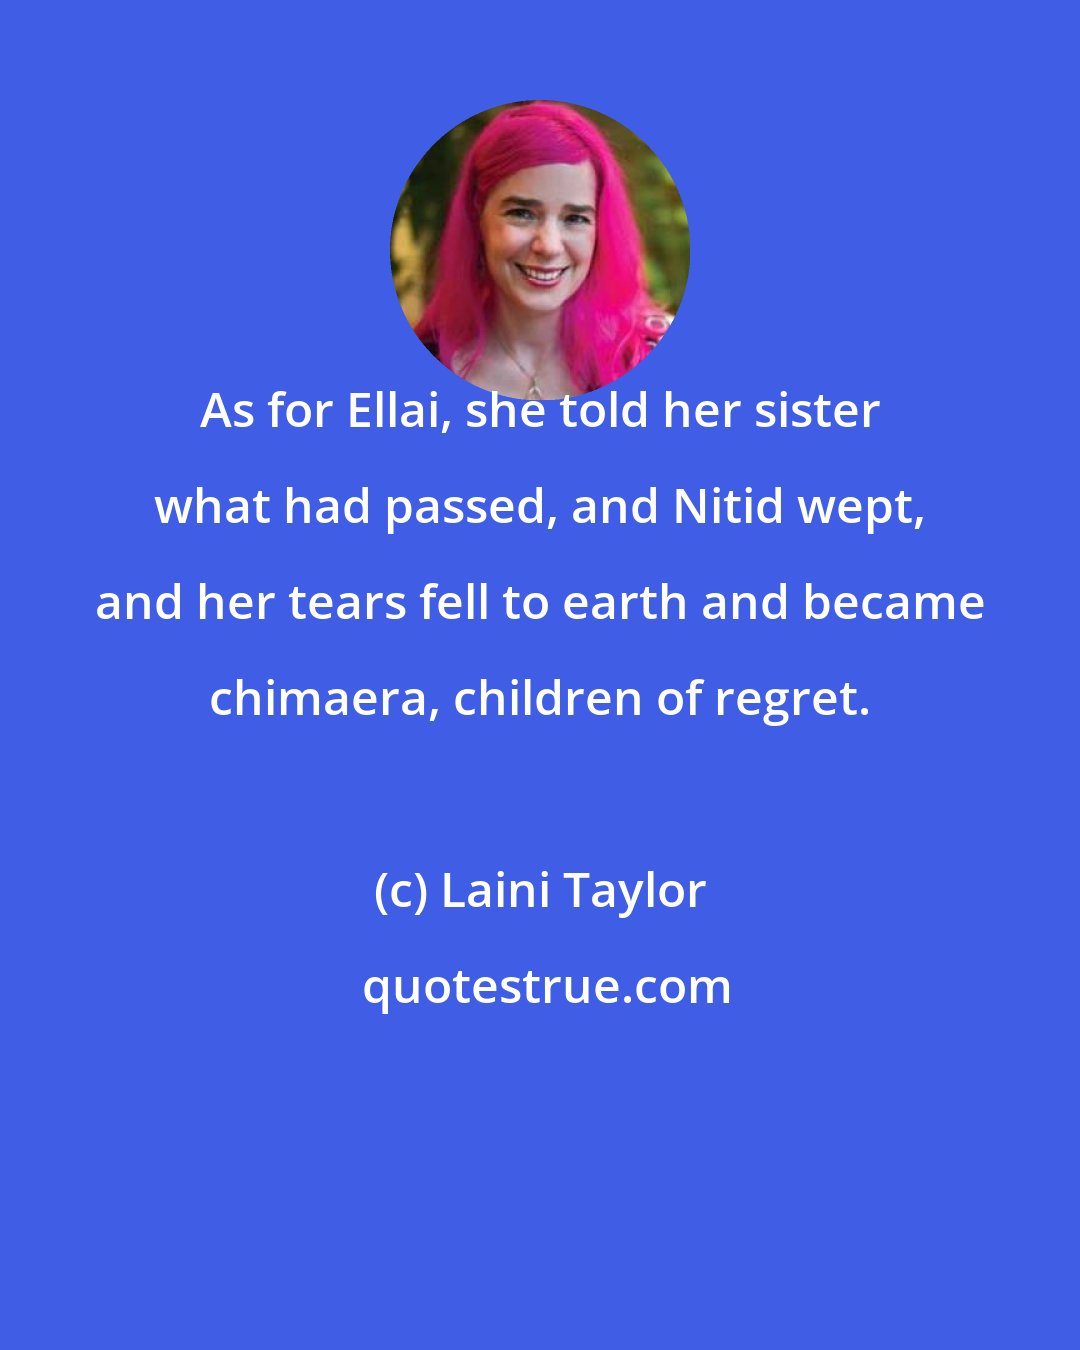 Laini Taylor: As for Ellai, she told her sister what had passed, and Nitid wept, and her tears fell to earth and became chimaera, children of regret.